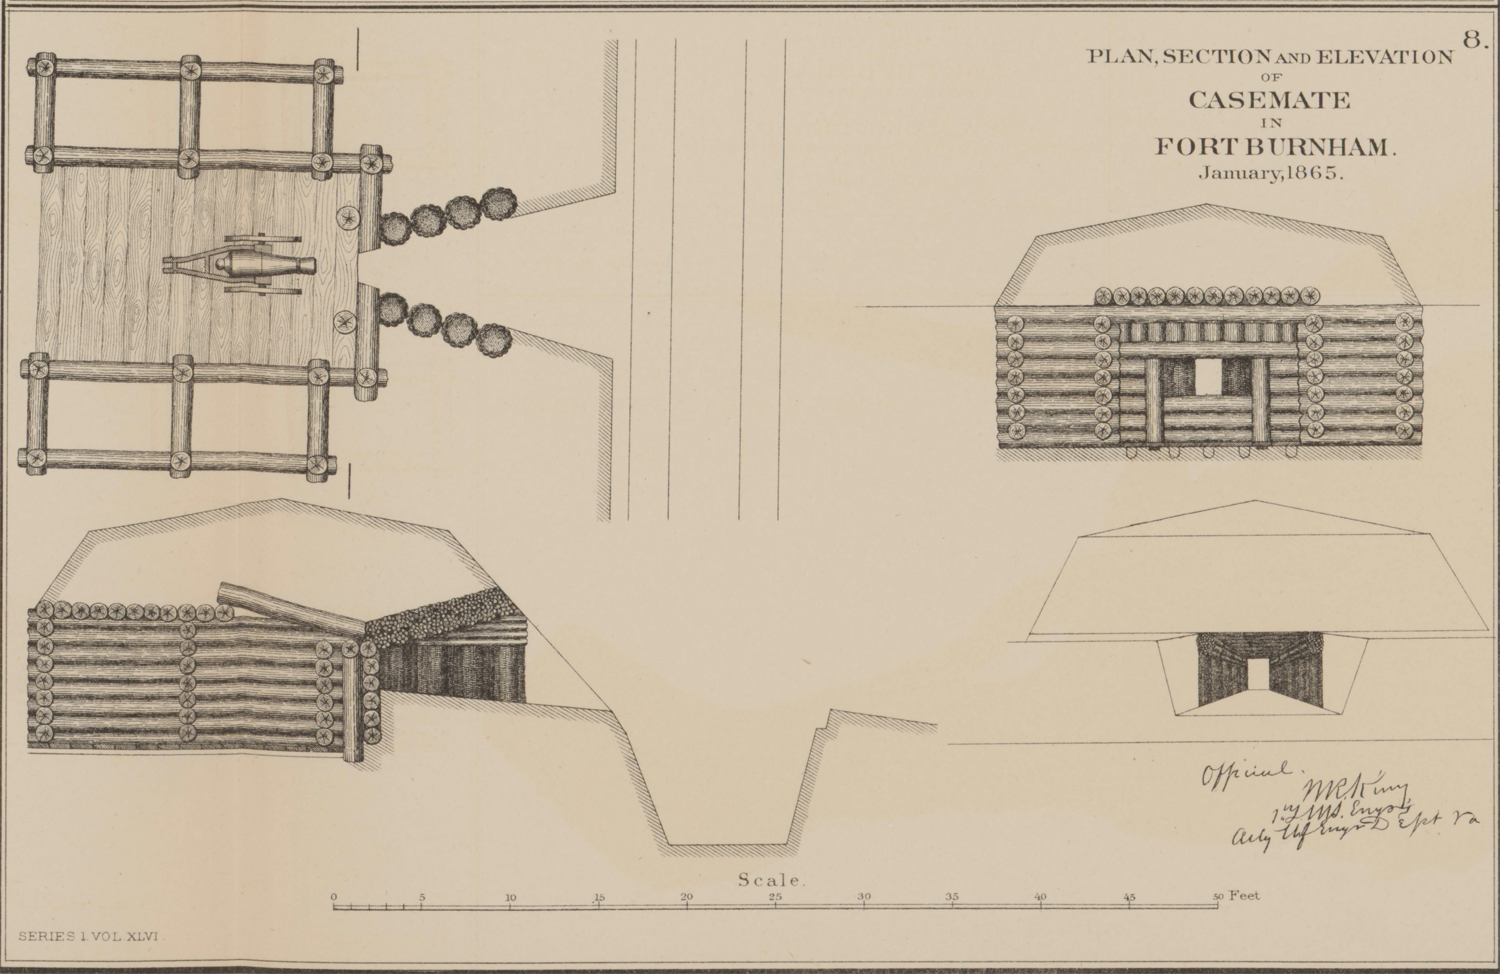 Plan, Section and Elevation of Casemate in Fort Burnham January 1865 (OR Atlas 68:8)